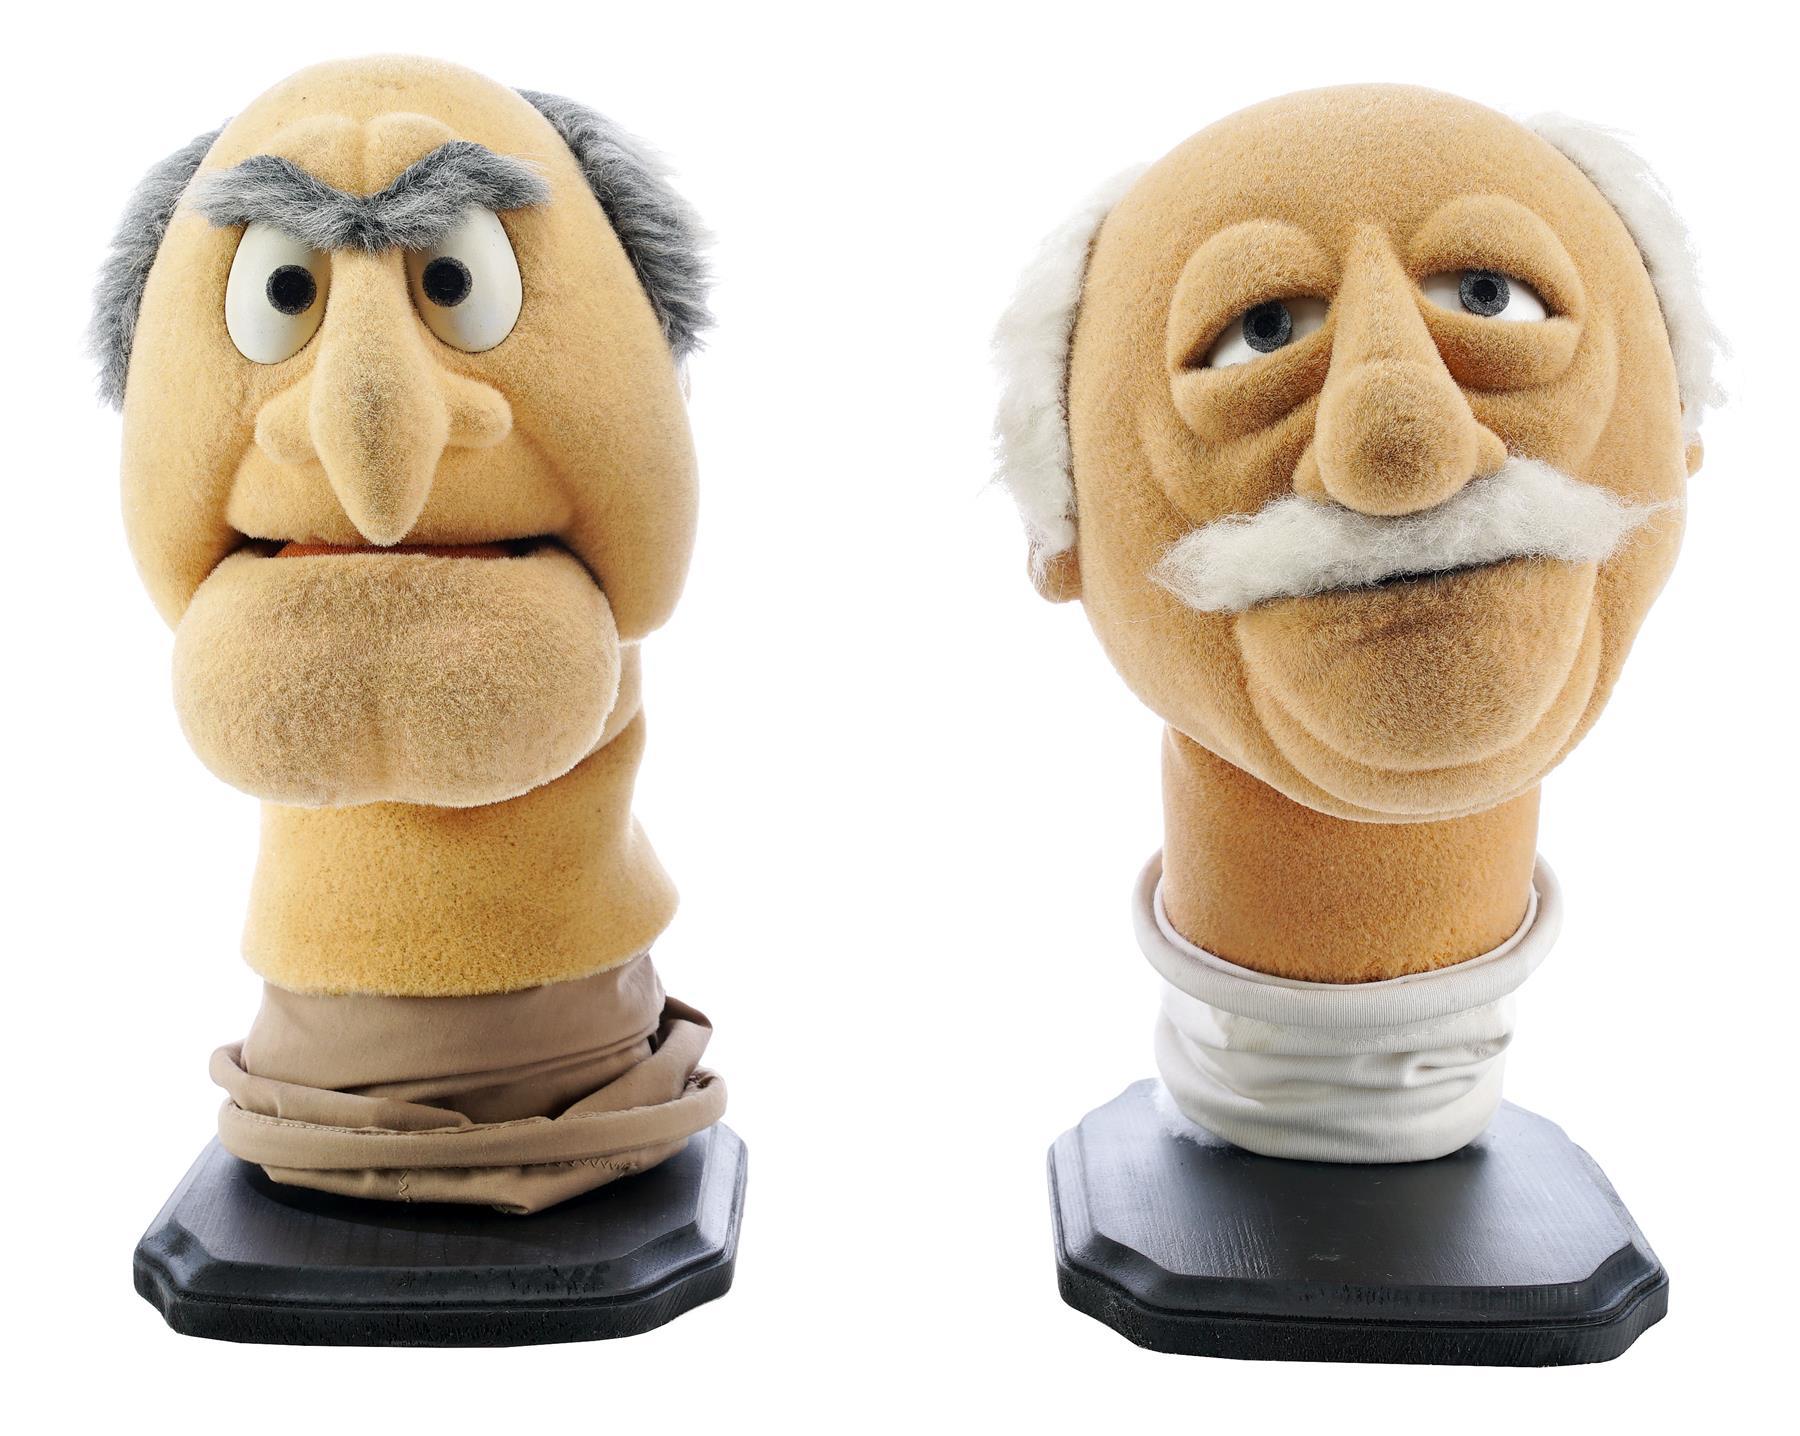 Statler and Waldorf from “The Muppets” Head to Auction